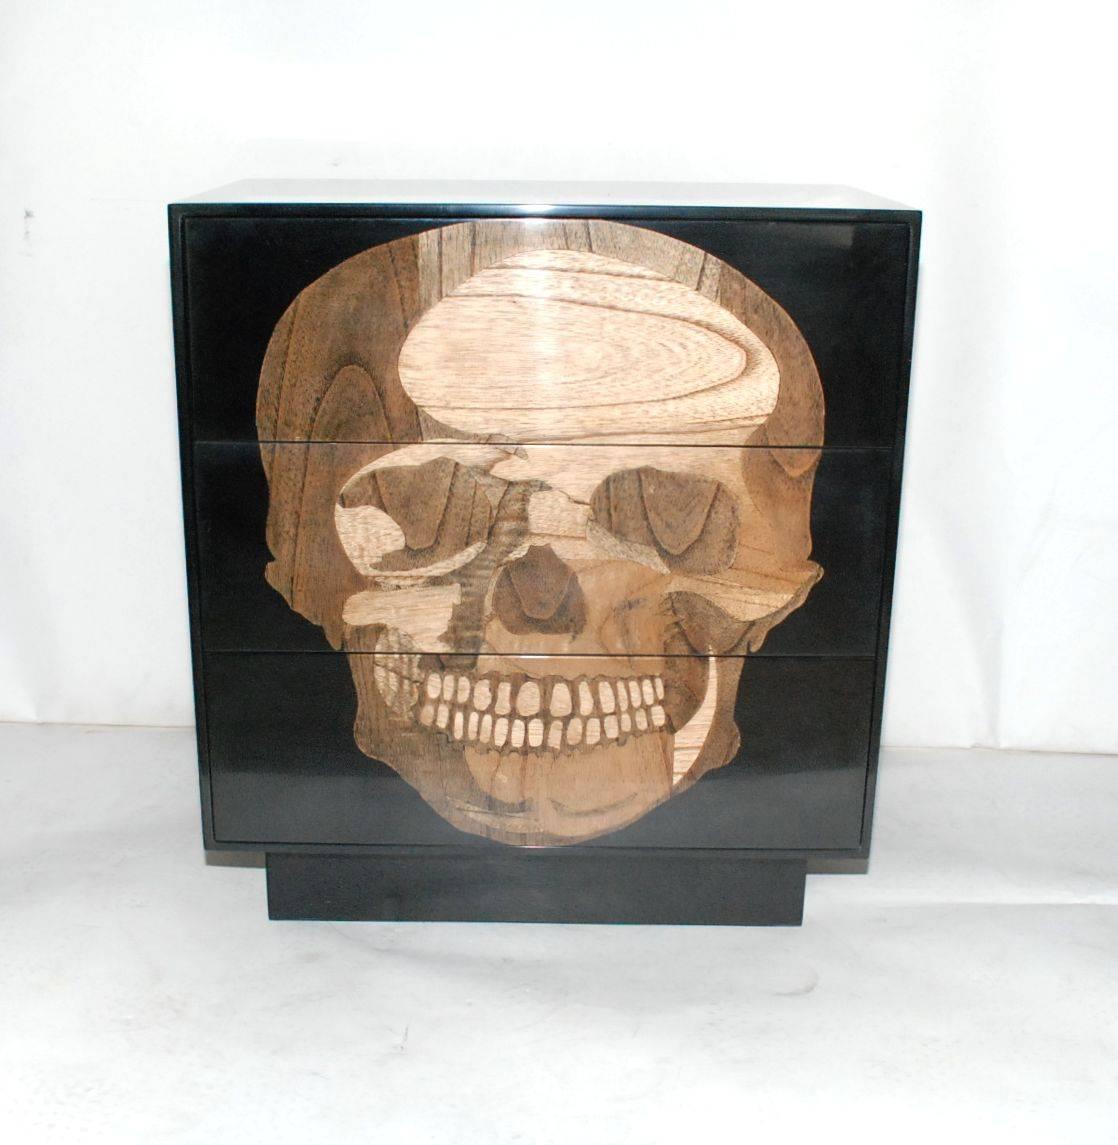 Pair of exotic wood inlay "skull" three drawers with resin finish sculptural side chests.